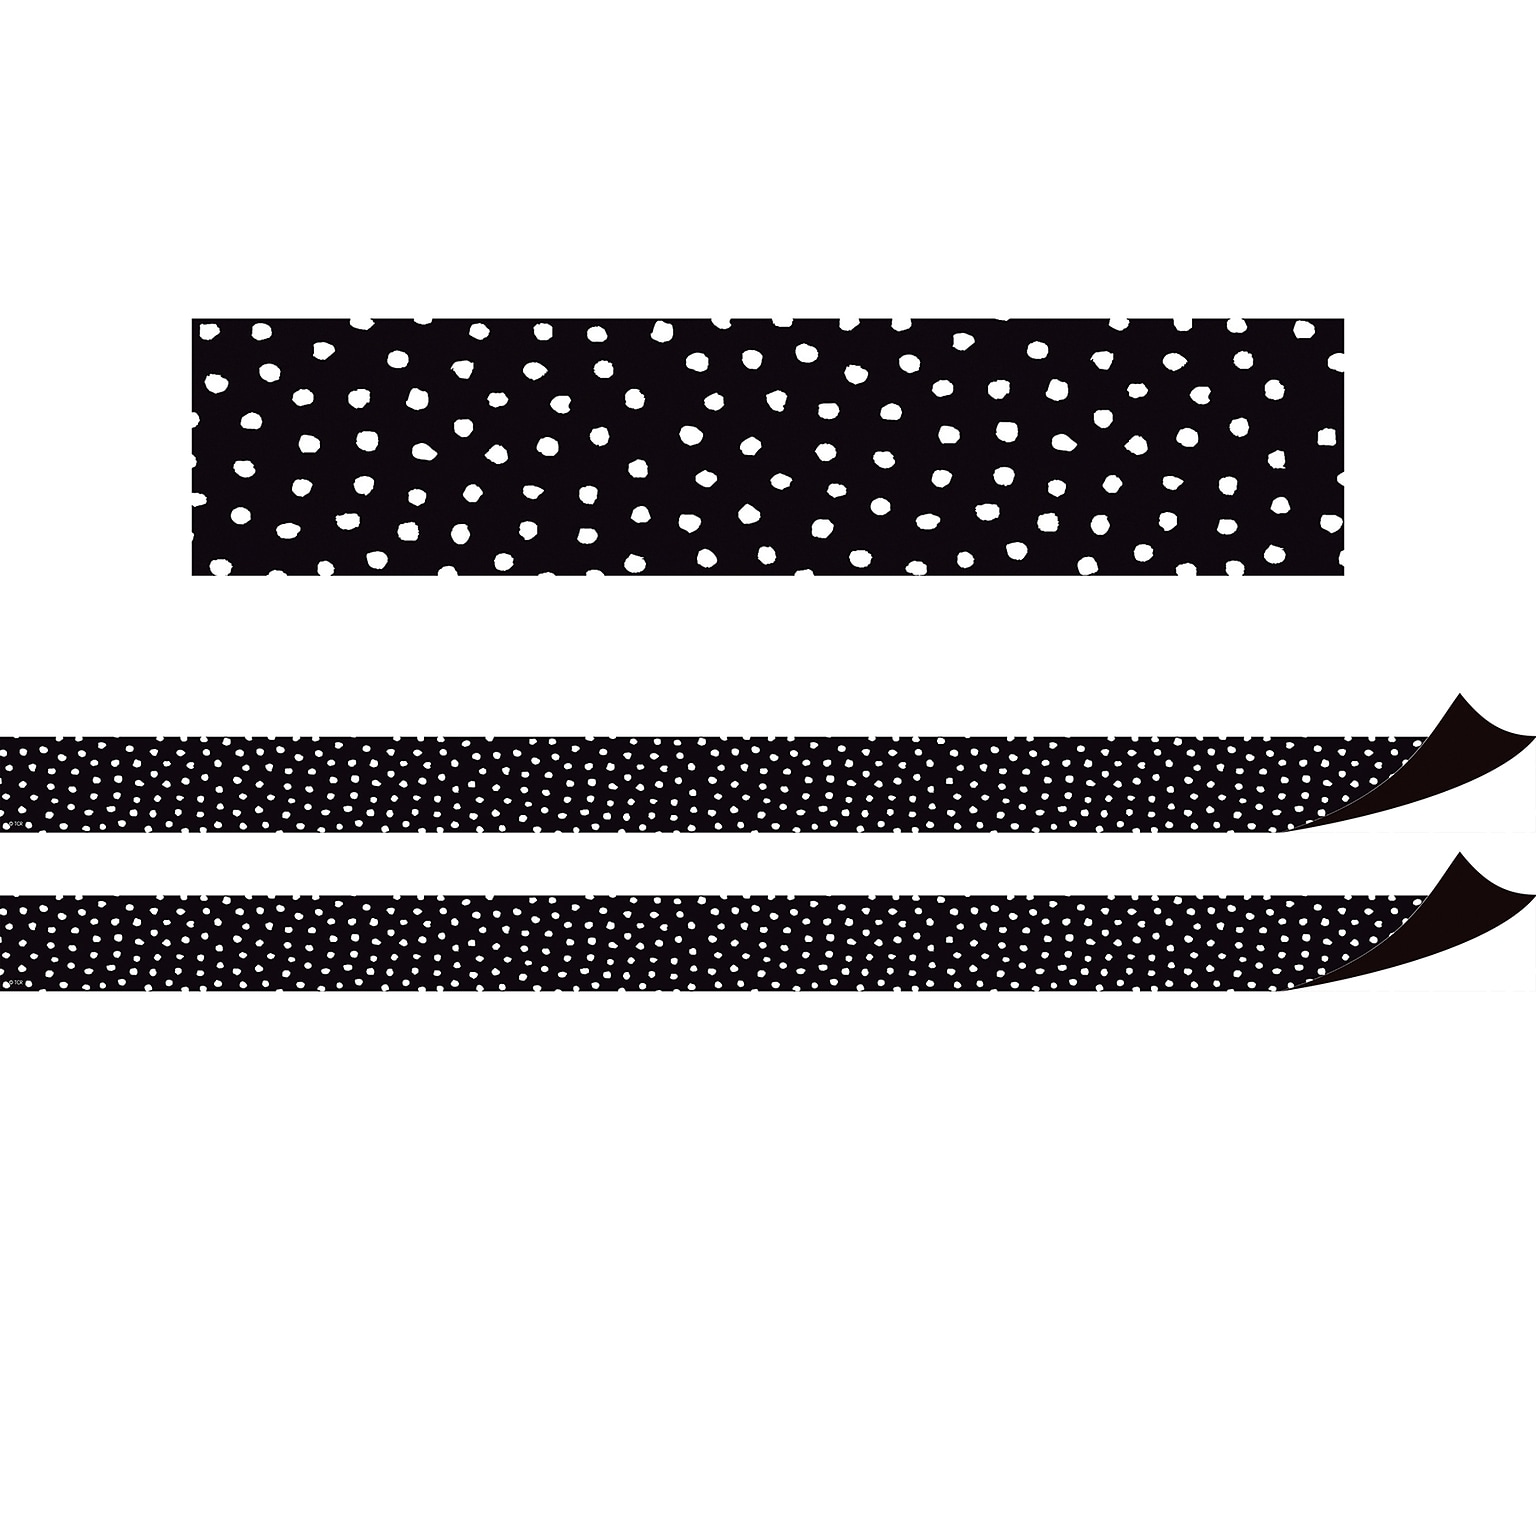 Teacher Created Resources Straight Magnetic Borders/Trim, 1.5 x 24, Black with White Painted Dots, 2/Pack (TCR77565-2)